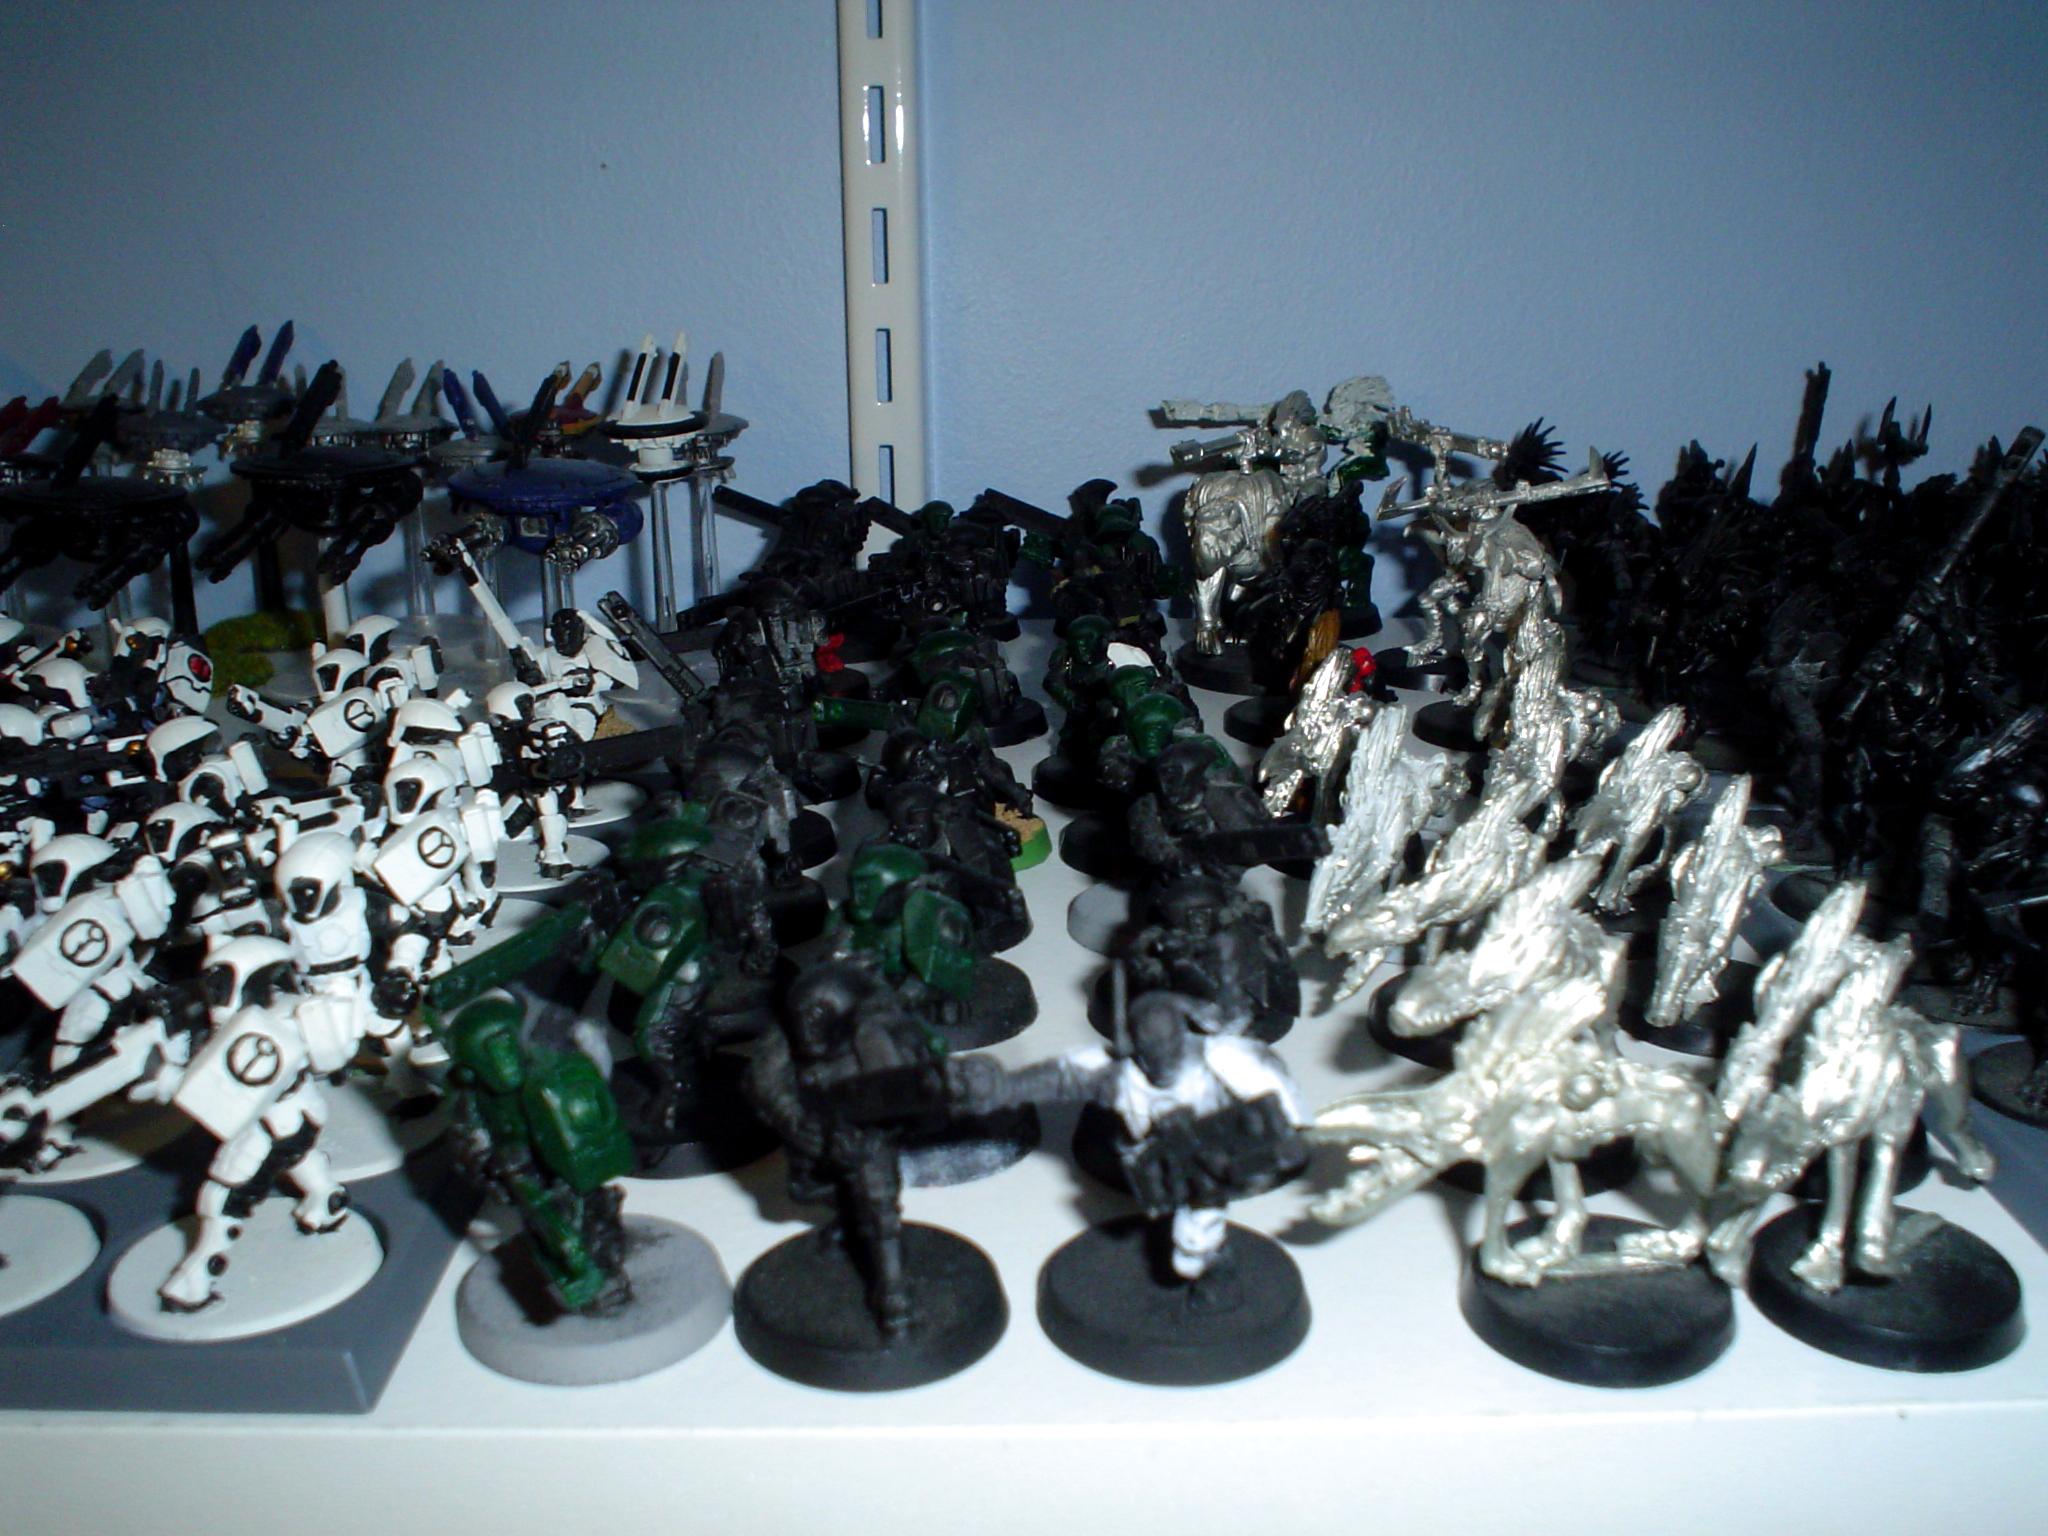 Tau, Kroot Hounds/Shapers and few Fire Warriors